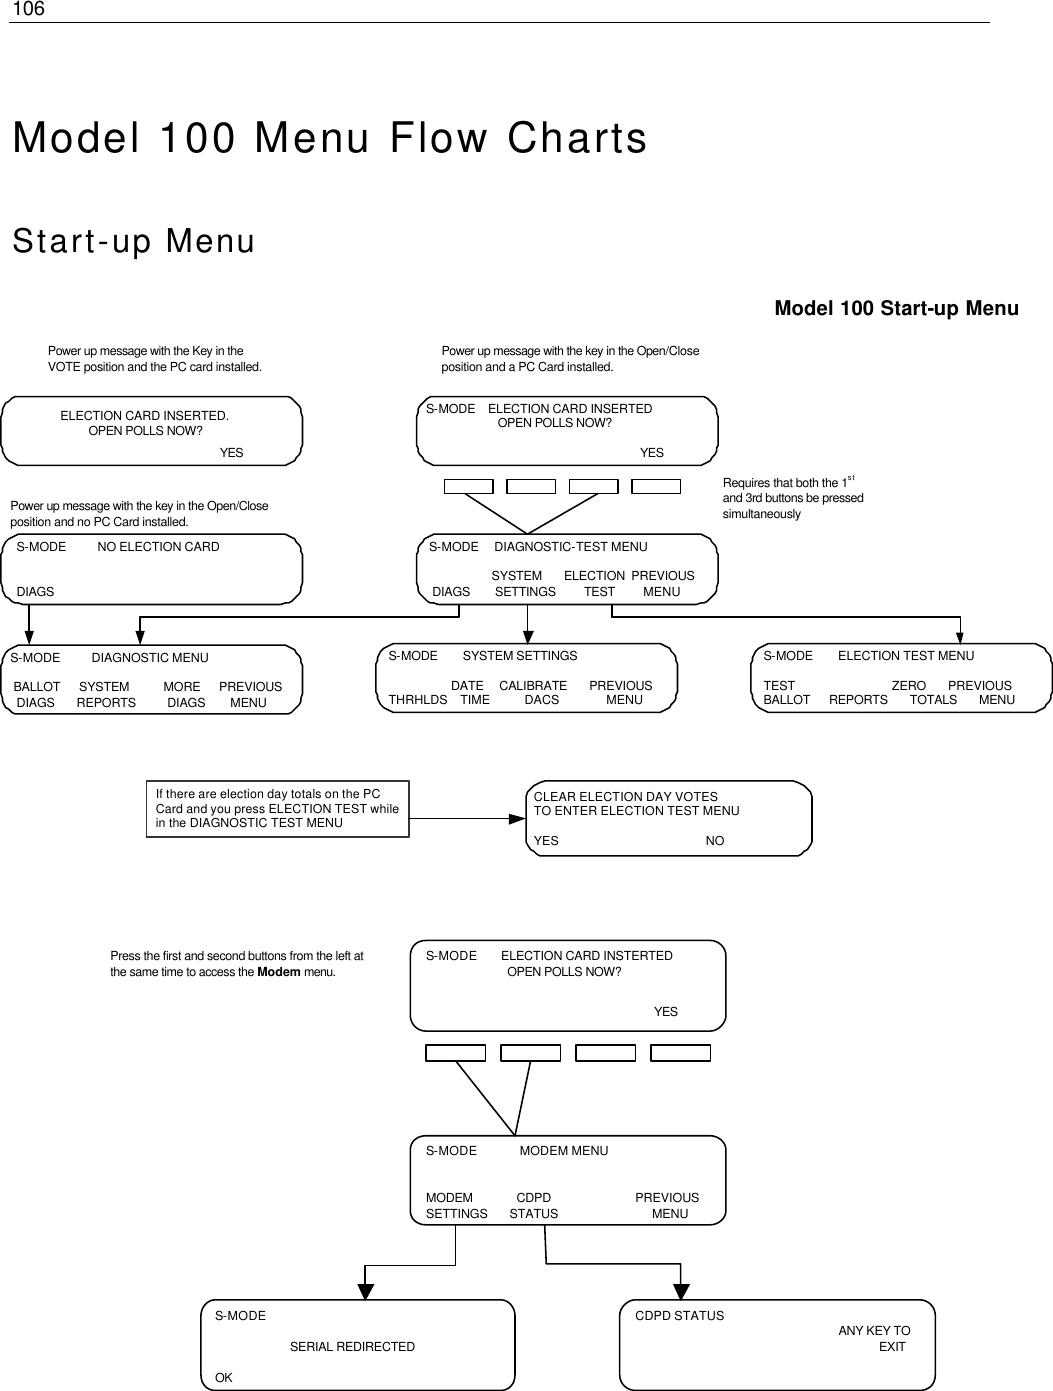 106   Model 100 Menu Flow Charts   Start-up Menu                     CLEAR ELECTION DAY VOTESTO ENTER ELECTION TEST MENUYES                                          NOIf there are election day totals on the PCCard and you press ELECTION TEST whilein the DIAGNOSTIC TEST MENU                       Model 100 Start-up Menu Power up message with the Key in the VOTE position and the PC card installed.  S-MODE    ELECTION CARD INSERTED                         OPEN POLLS NOW?                 YES Power up message with the key in the Open/Close position and no PC Card installed.    S-MODE          NO ELECTION CARD    DIAGS Requires that both the 1st and 3rd buttons be pressed simultaneously   S-MODE     DIAGNOSTIC-TEST MENU                       SYSTEM       ELECTION  PREVIOUS    DIAGS        SETTINGS         TEST         MENU  S-MODE          DIAGNOSTIC MENU   BALLOT      SYSTEM           MORE      PREVIOUS    DIAGS       REPORTS          DIAGS        MENU   S-MODE        SYSTEM SETTINGS                       DATE     CALIBRATE       PREVIOUS   THRHLDS    TIME           DACS               MENU   S-MODE        ELECTION TEST MENU   TEST                               ZERO       PREVIOUS   BALLOT      REPORTS       TOTALS       MENU Power up message with the key in the Open/Close position and a PC Card installed. ELECTION CARD INSERTED. OPEN POLLS NOW? YES S-MODE ELECTION CARD INSTERTED    OPEN POLLS NOW? S-MODE        MODEM MENU   MODEM      CDPD                    PREVIOUS SETTINGS       STATUS                              MENU S-MODE           SERIAL REDIRECTED  OK CDPD STATUS                                    ANY KEY TO          EXIT Press the first and second buttons from the left at the same time to access the Modem menu. YES 